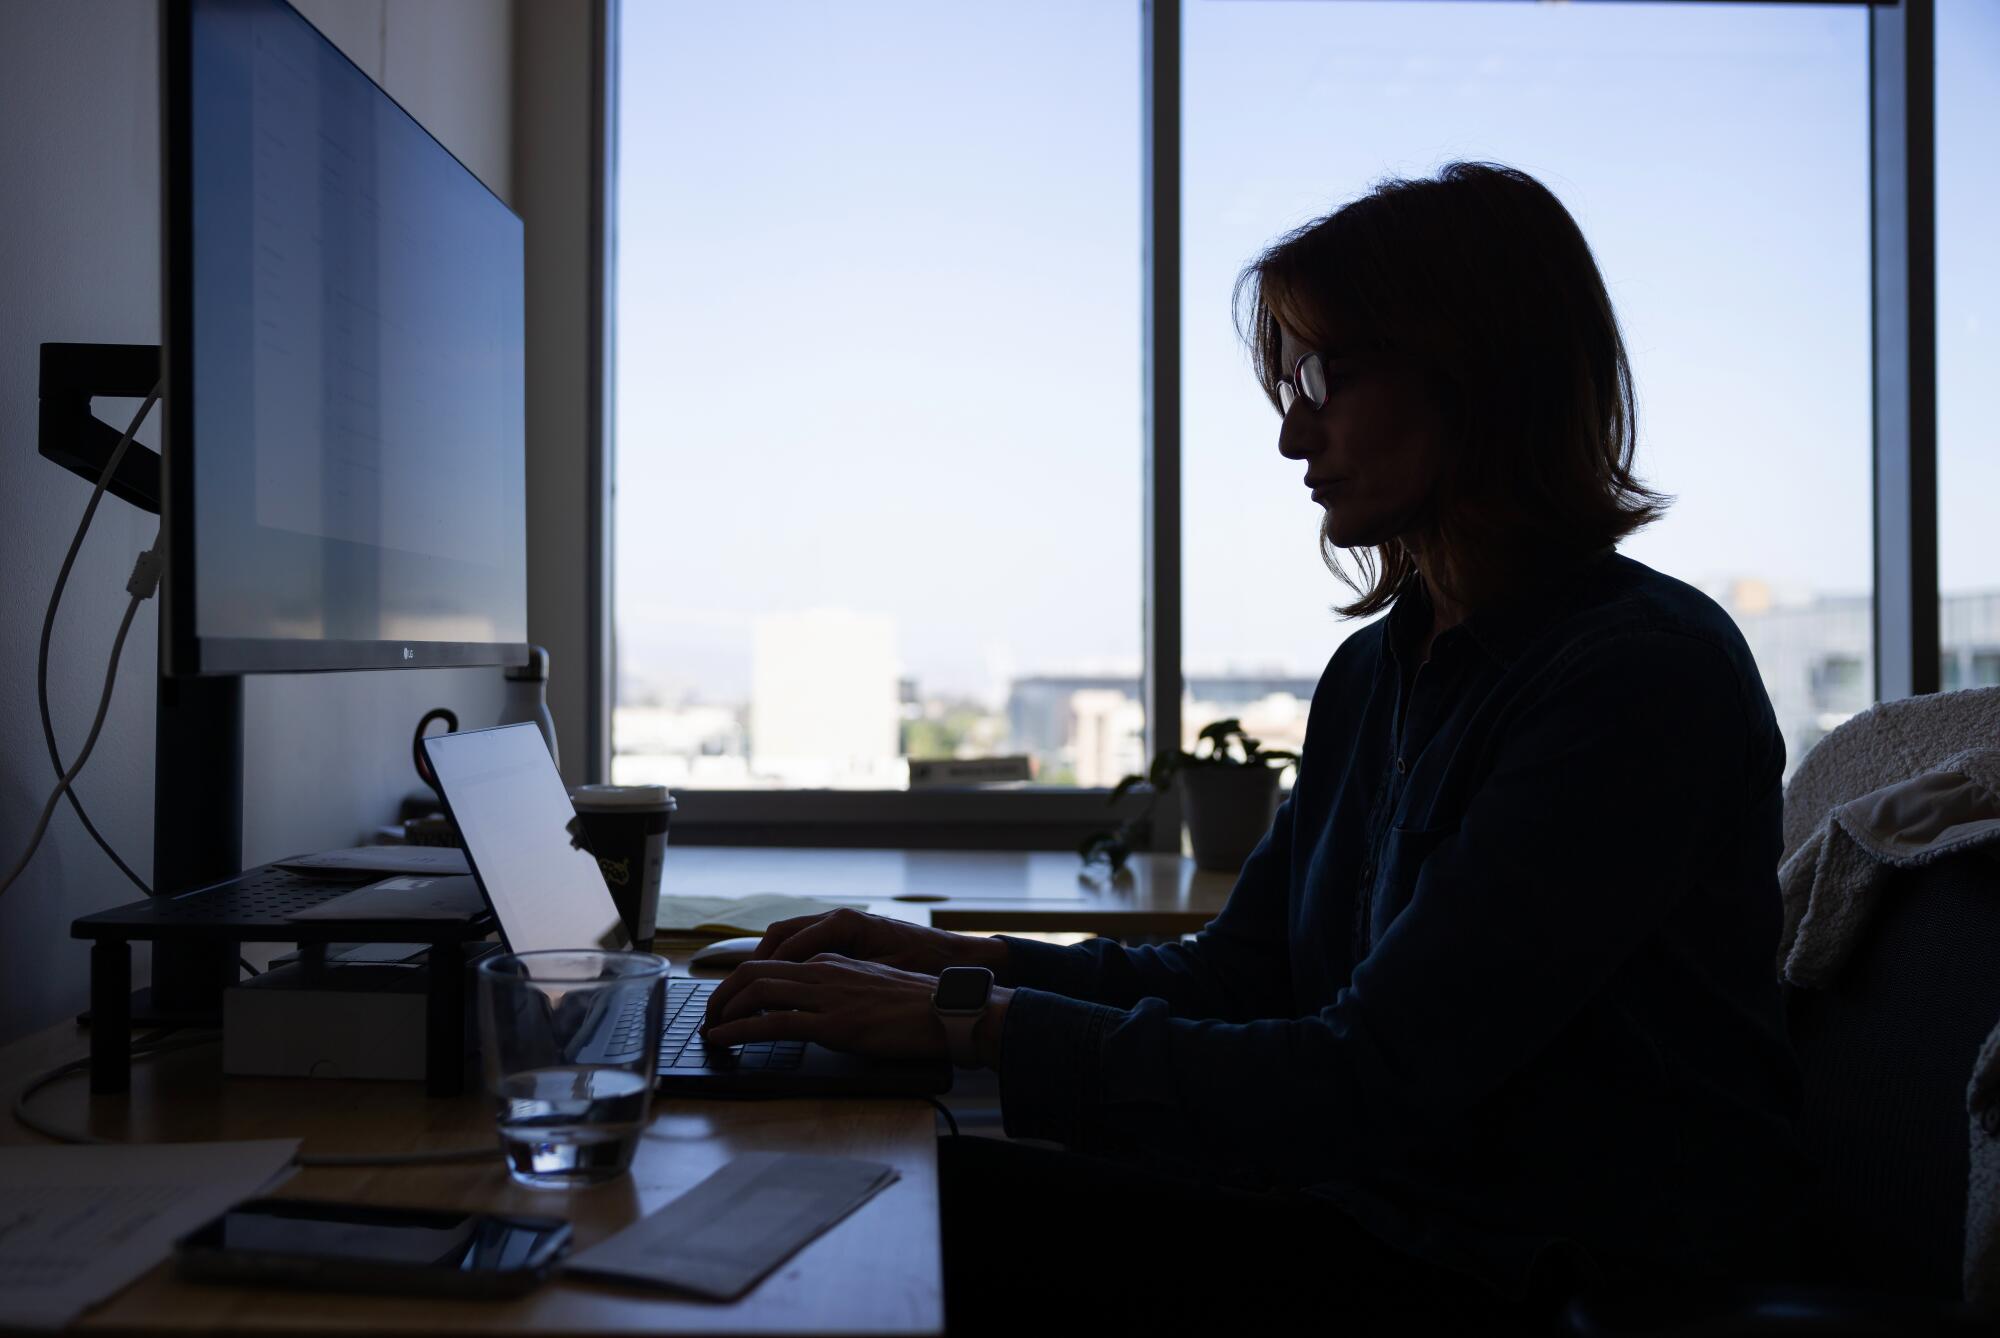 A woman at a desk in an office is silhouetted by light from large windows.